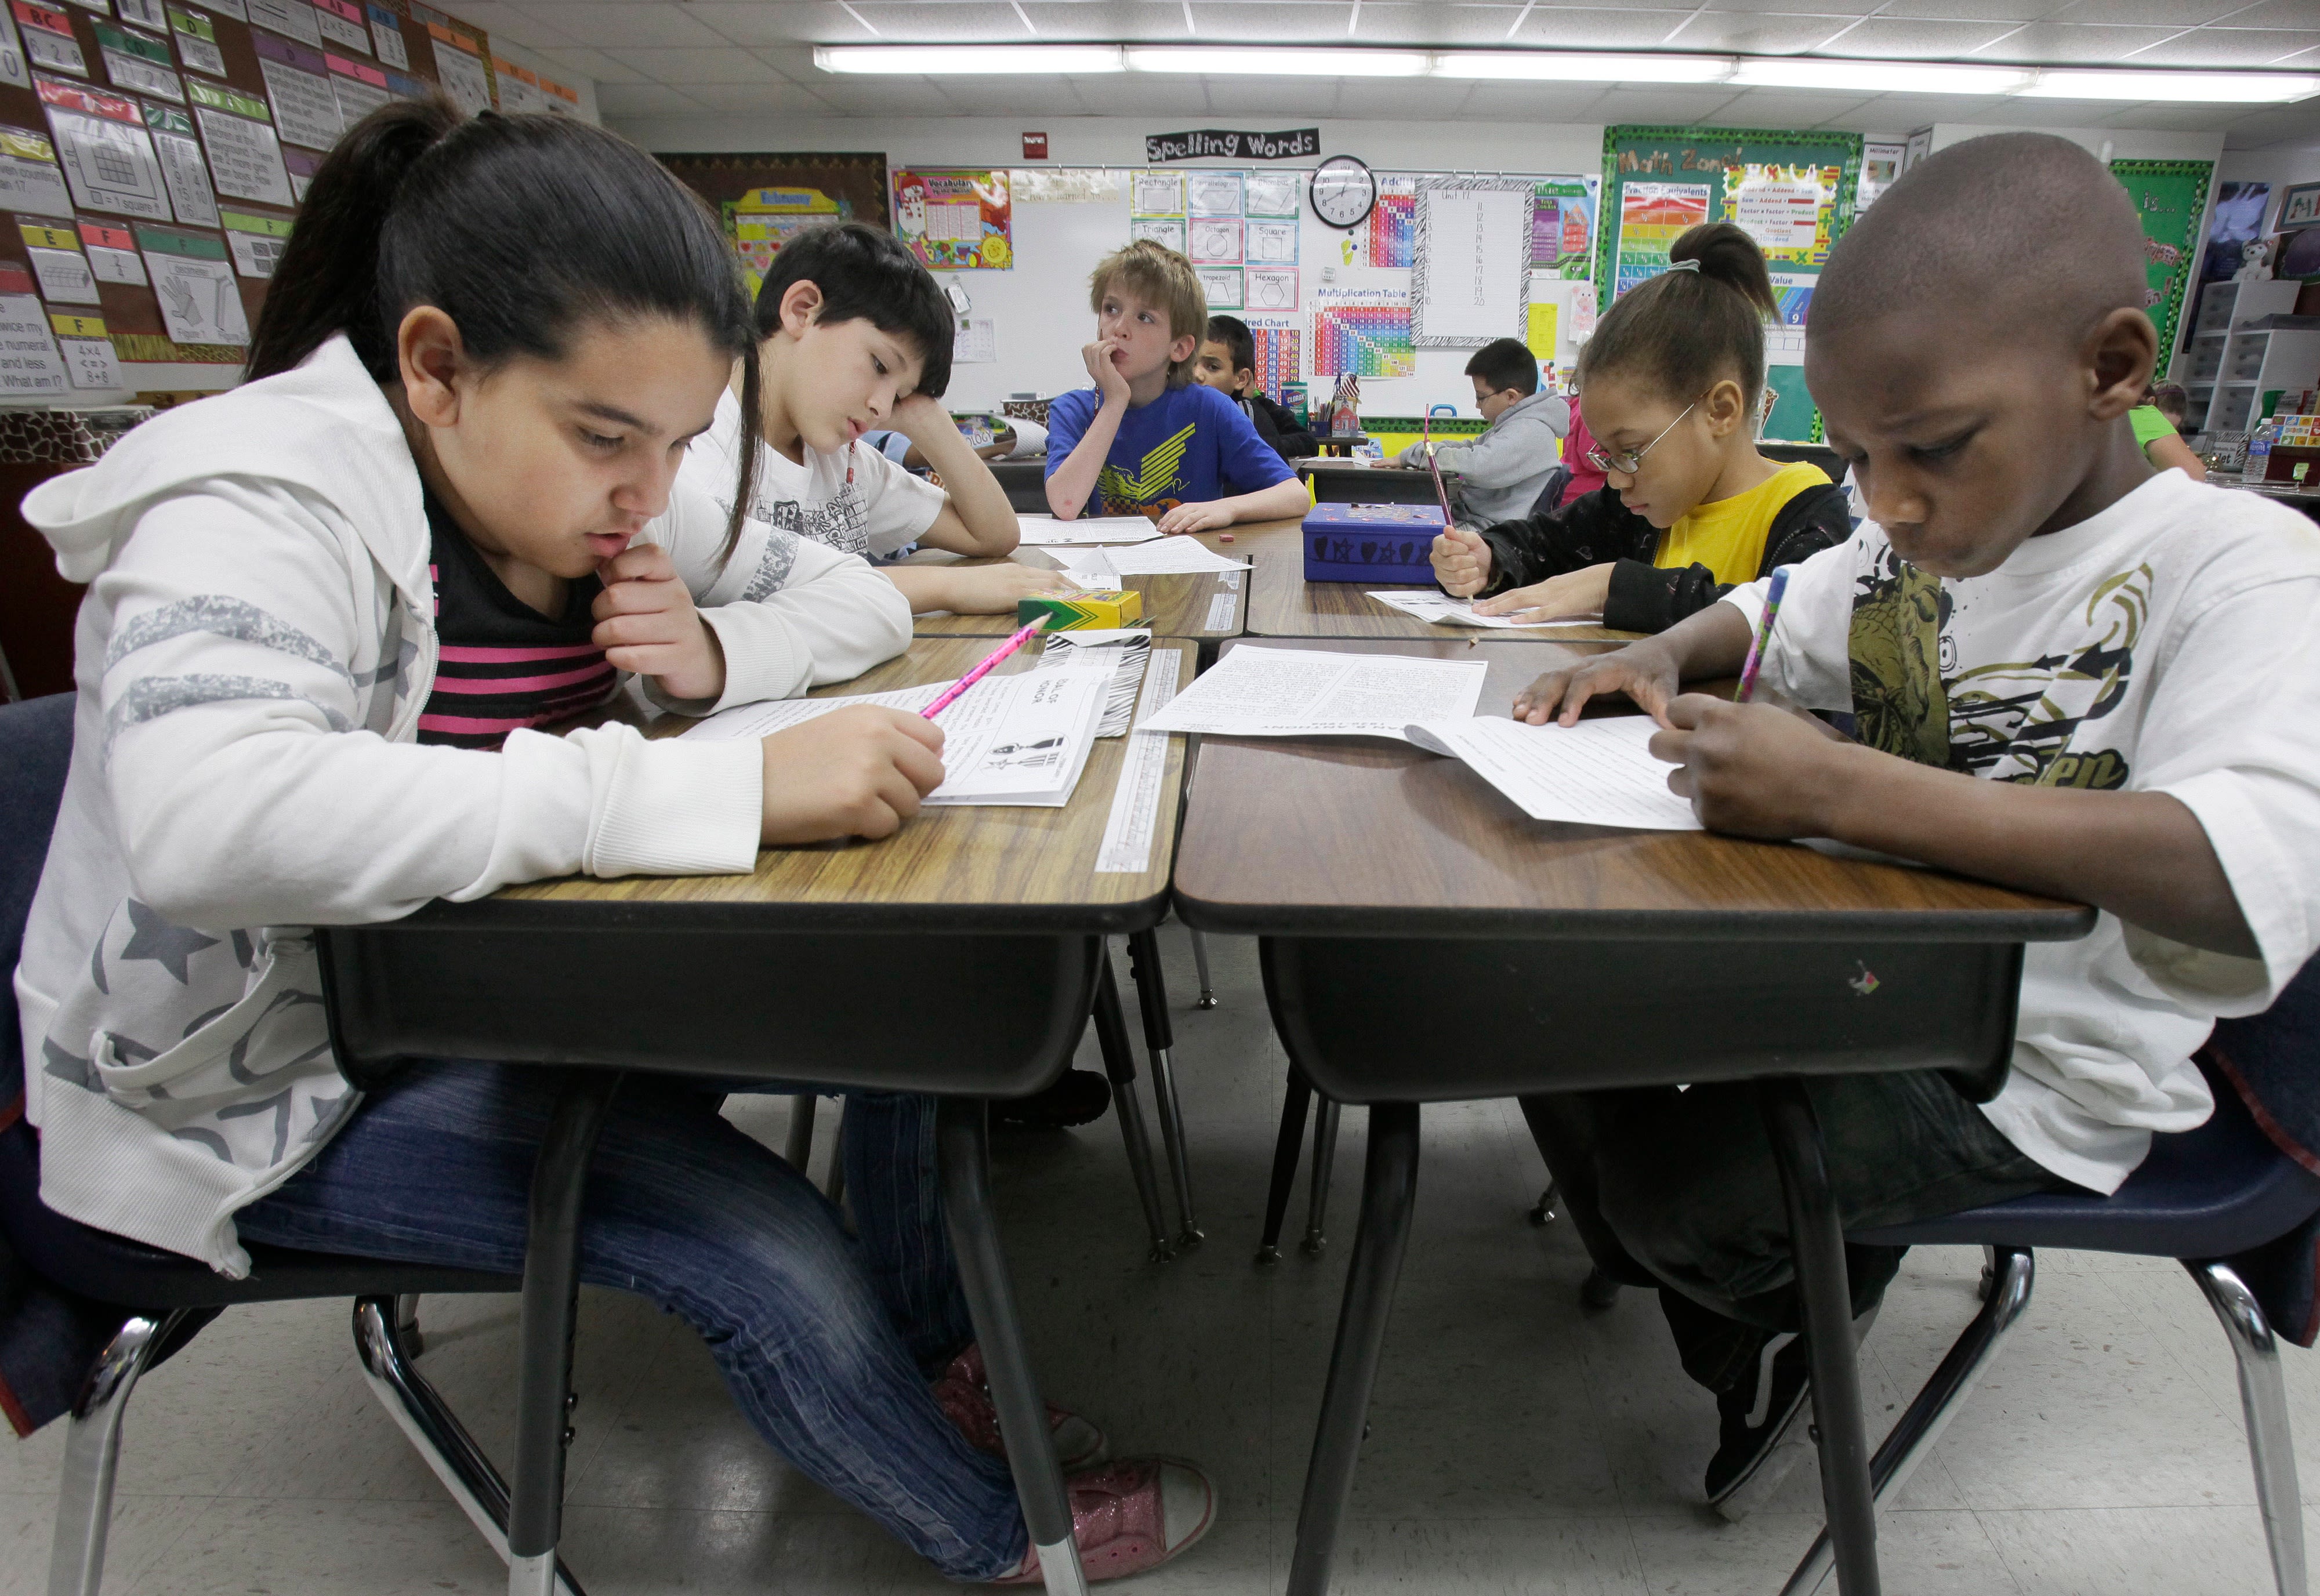 Texas may pay schools to use curriculum critics call overtly Christian